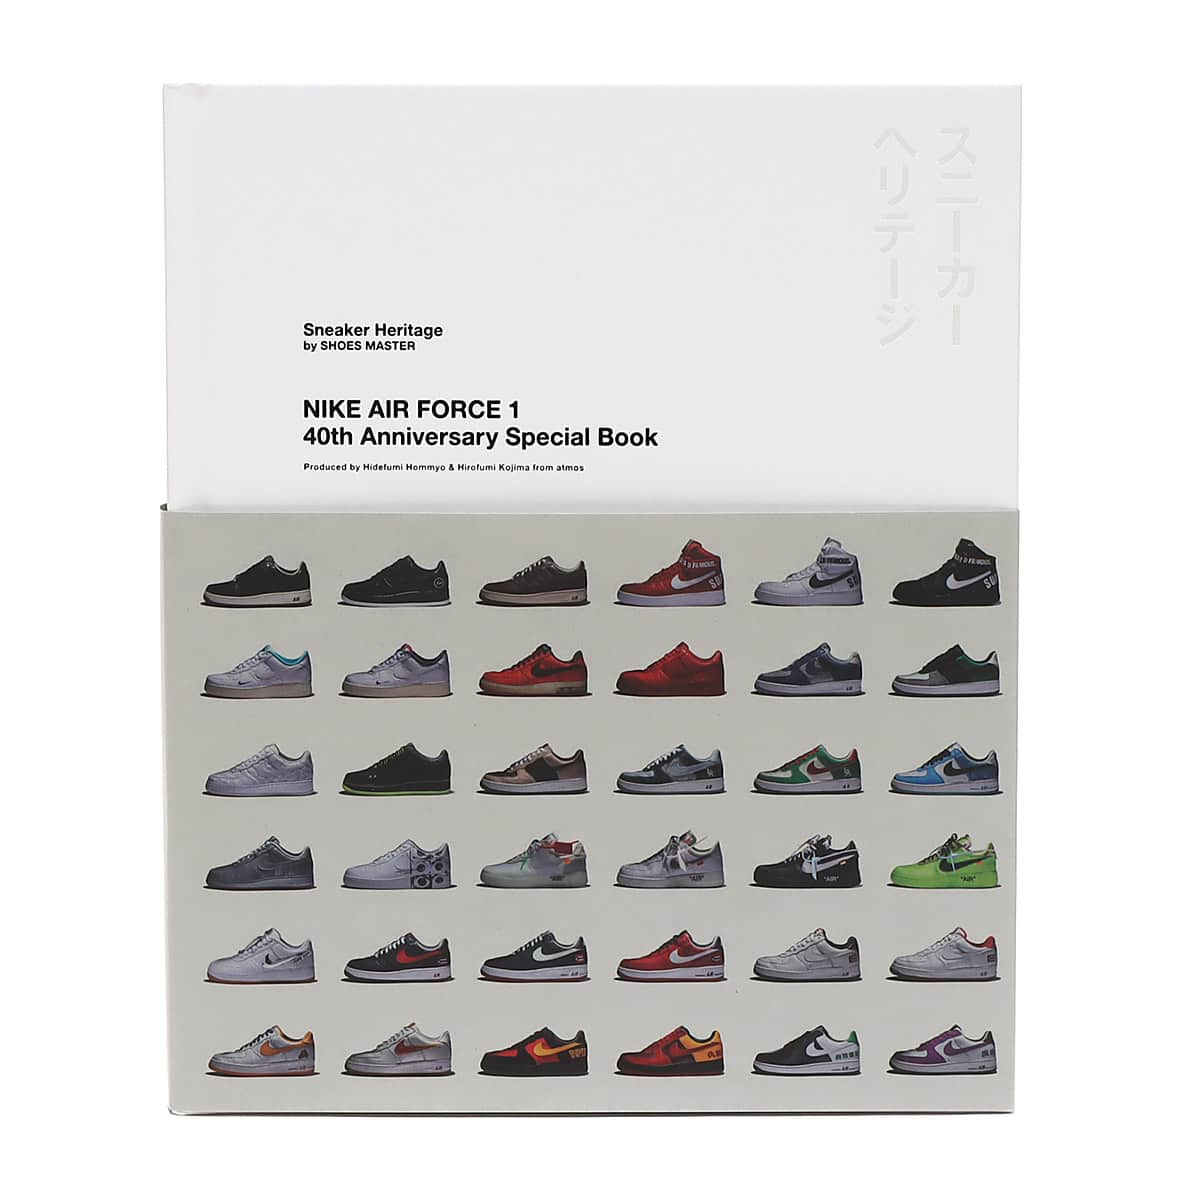 Sneaker Heritage by SHOES MASTER "NIKE AIR FORCE 1 40th Anniversary" Special Book 22FA-S_photo_large